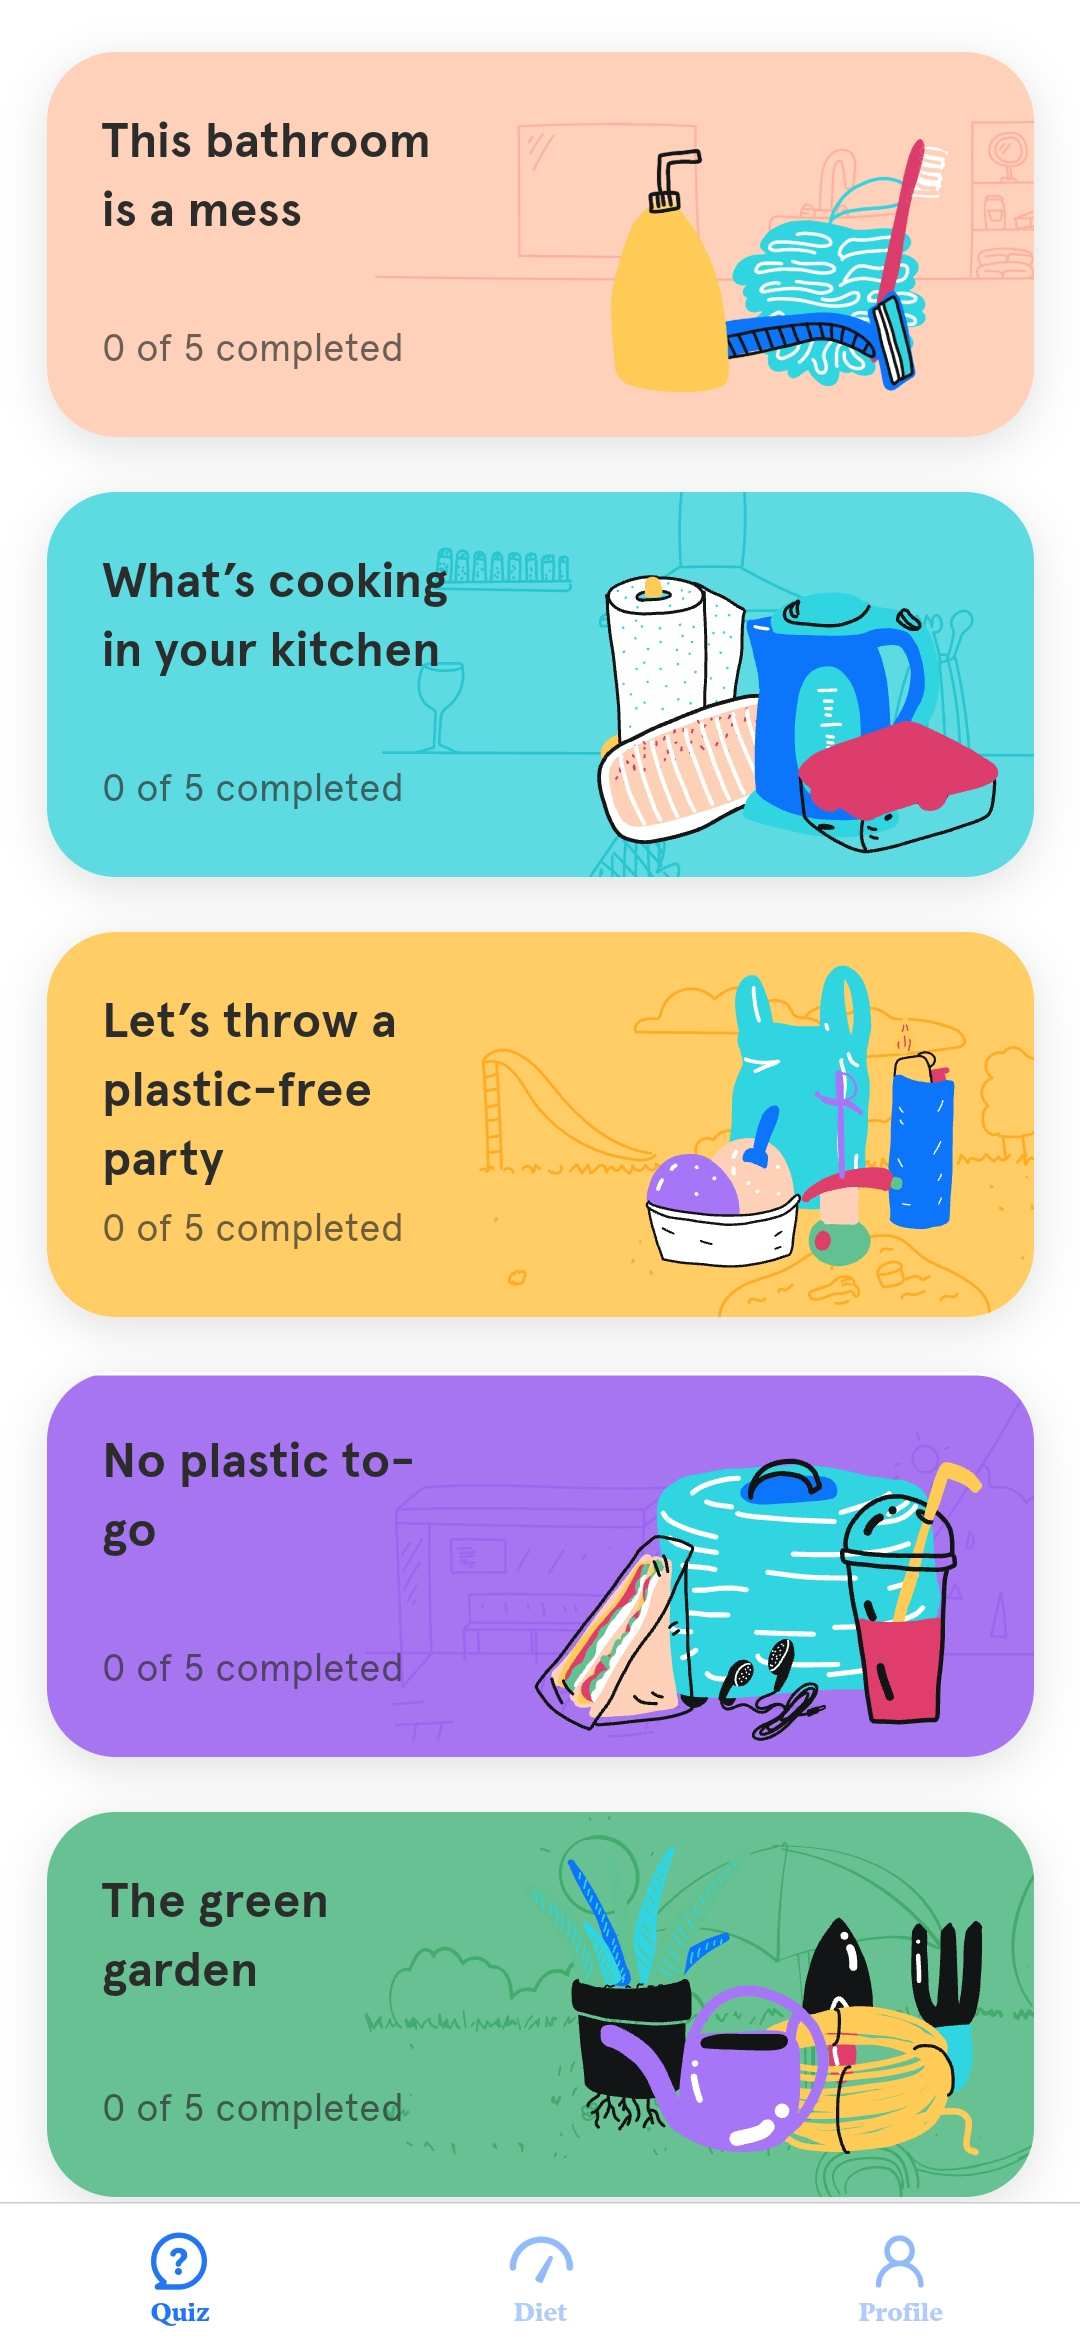 My Plastic Footprint analyzes each room in your house for different ways to reduce plastic